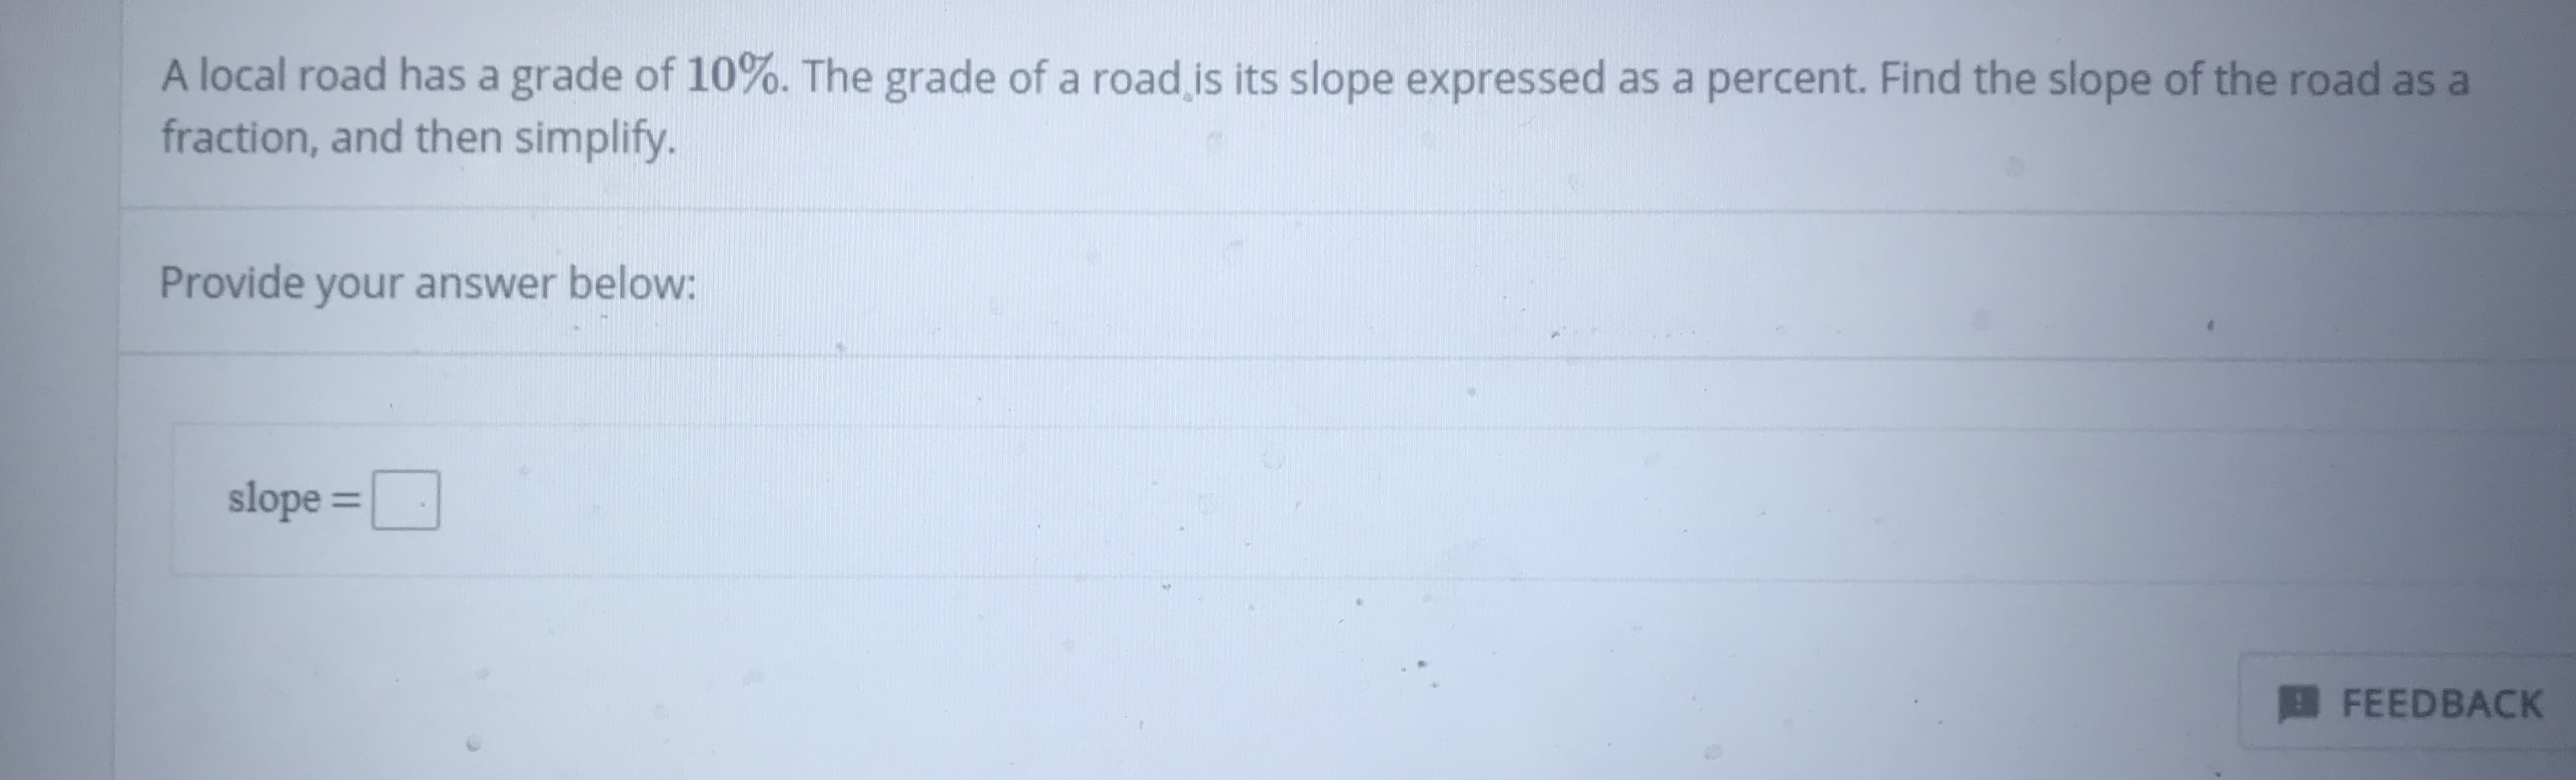 A local road has a grade of 10%. The grade of a road is its slope expressed as a percent. Find the slope of the road as a
fraction, and then simplify.
Provide your answer below:
slope =
FEEDBACK
